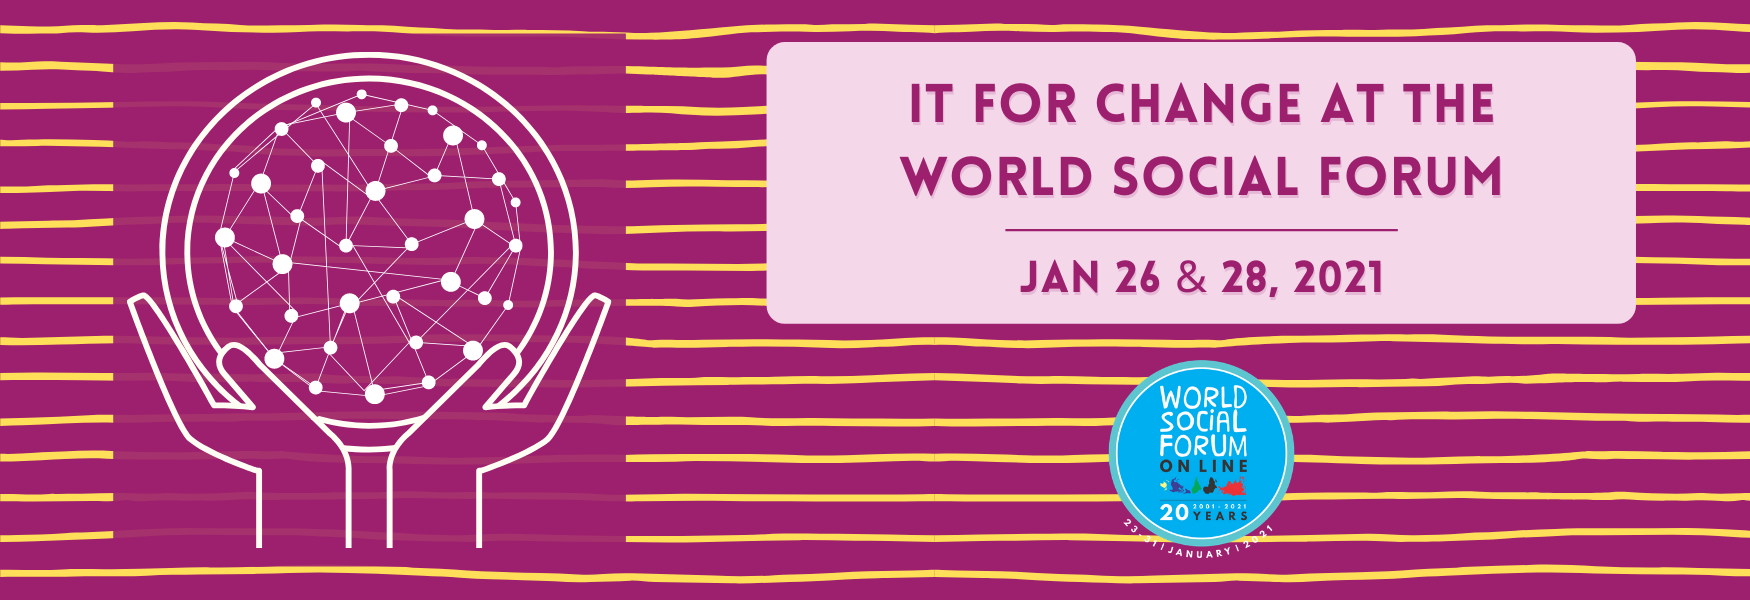 IT for Change at the World Social Forum, 2021